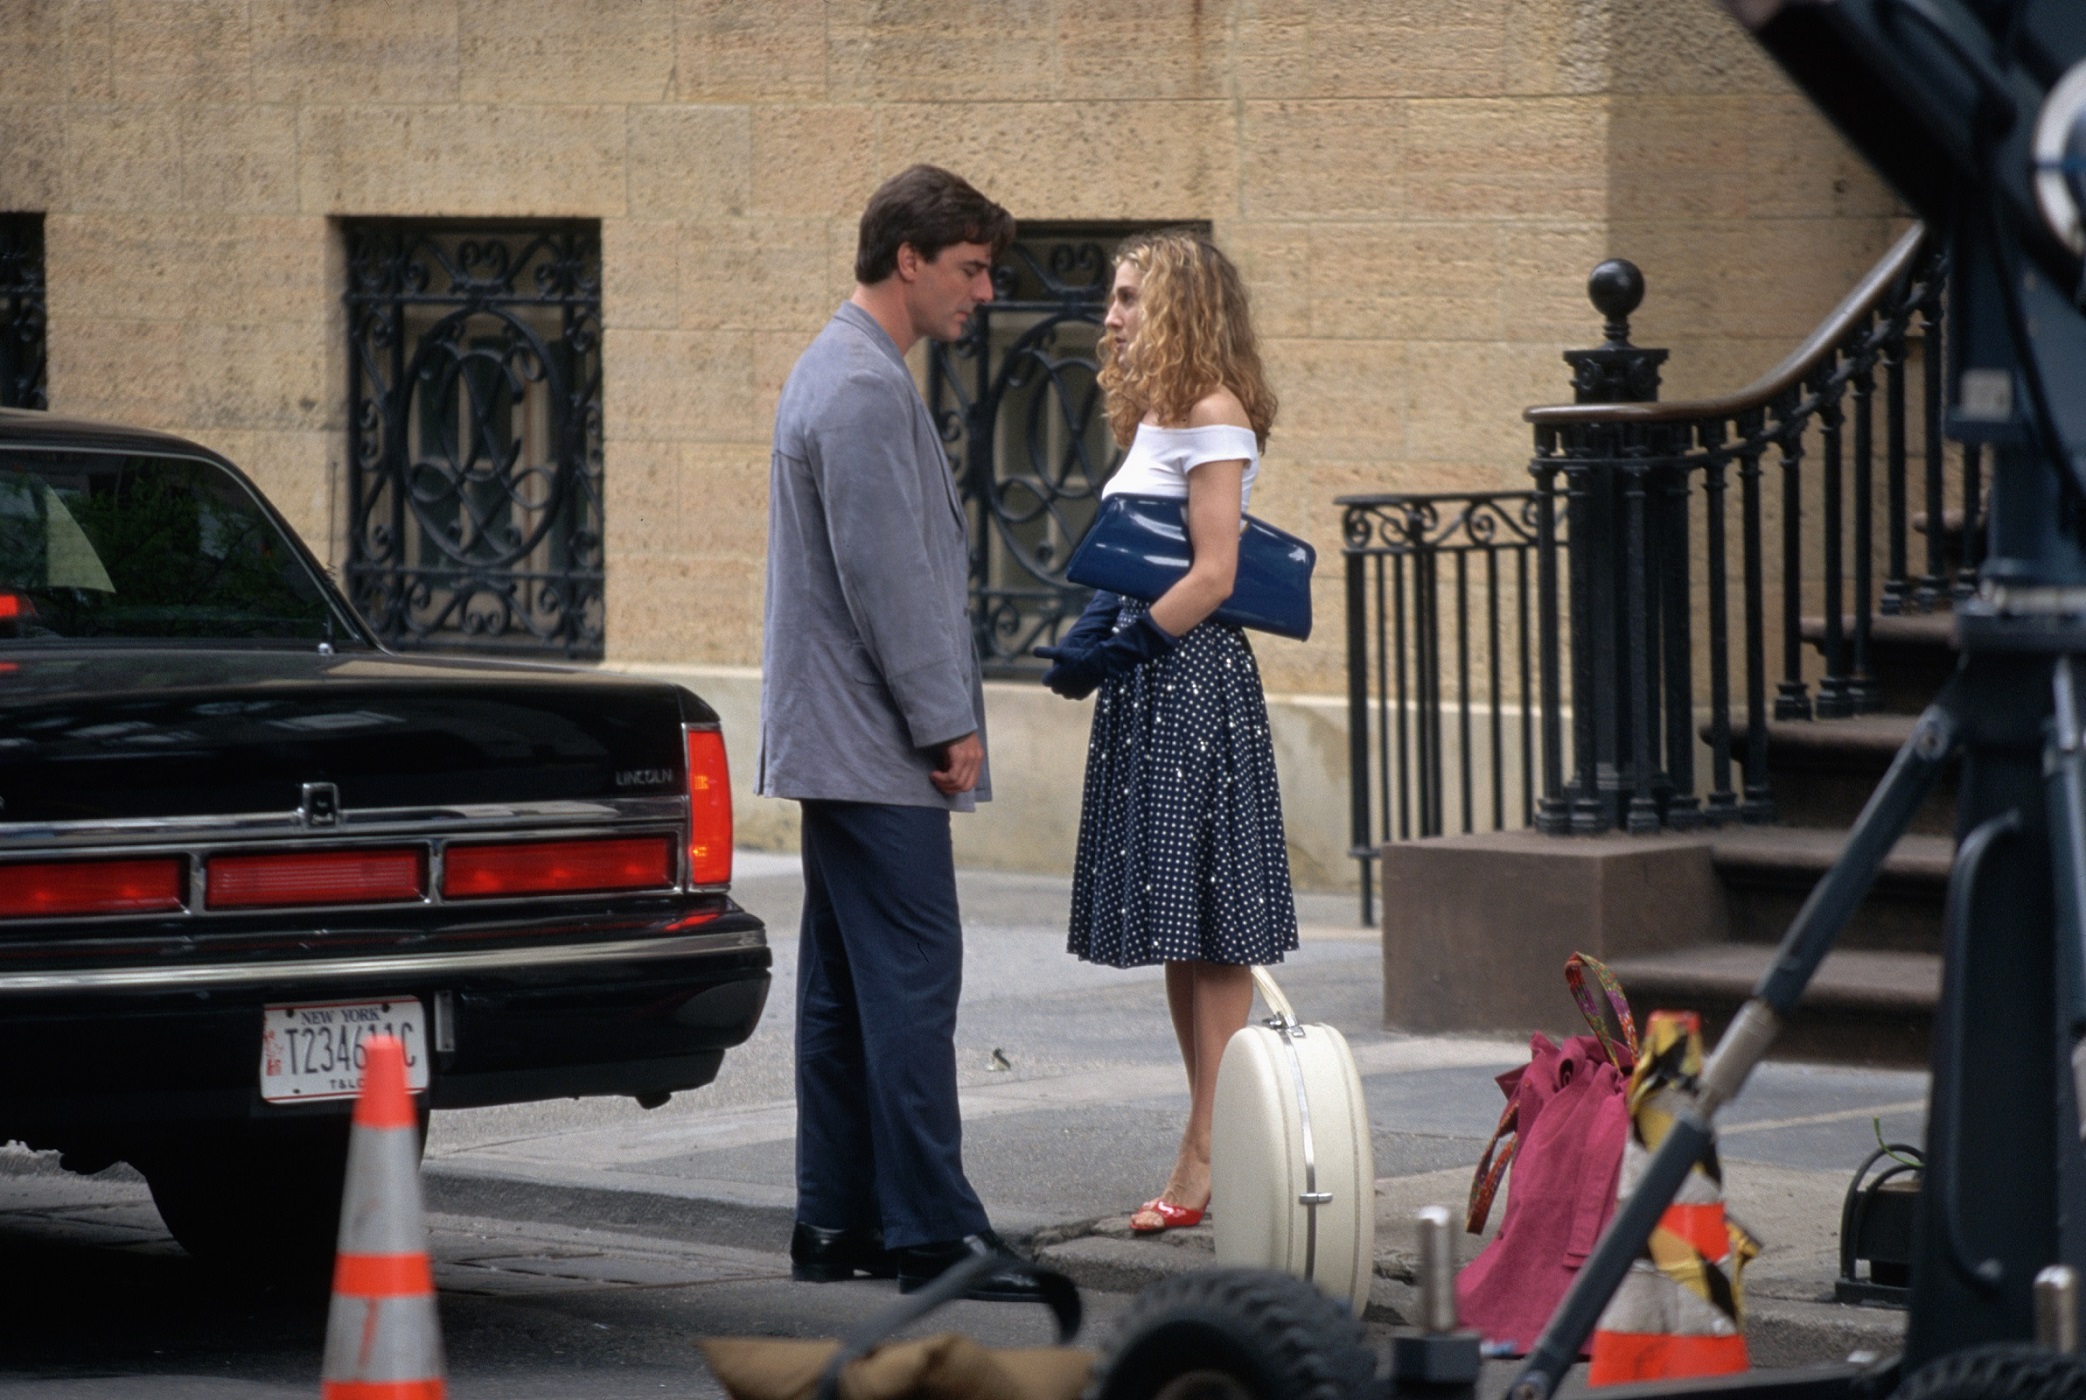 Carrie Bradshaw breaks up with Mr. Big in 'Sex and the City' season 1